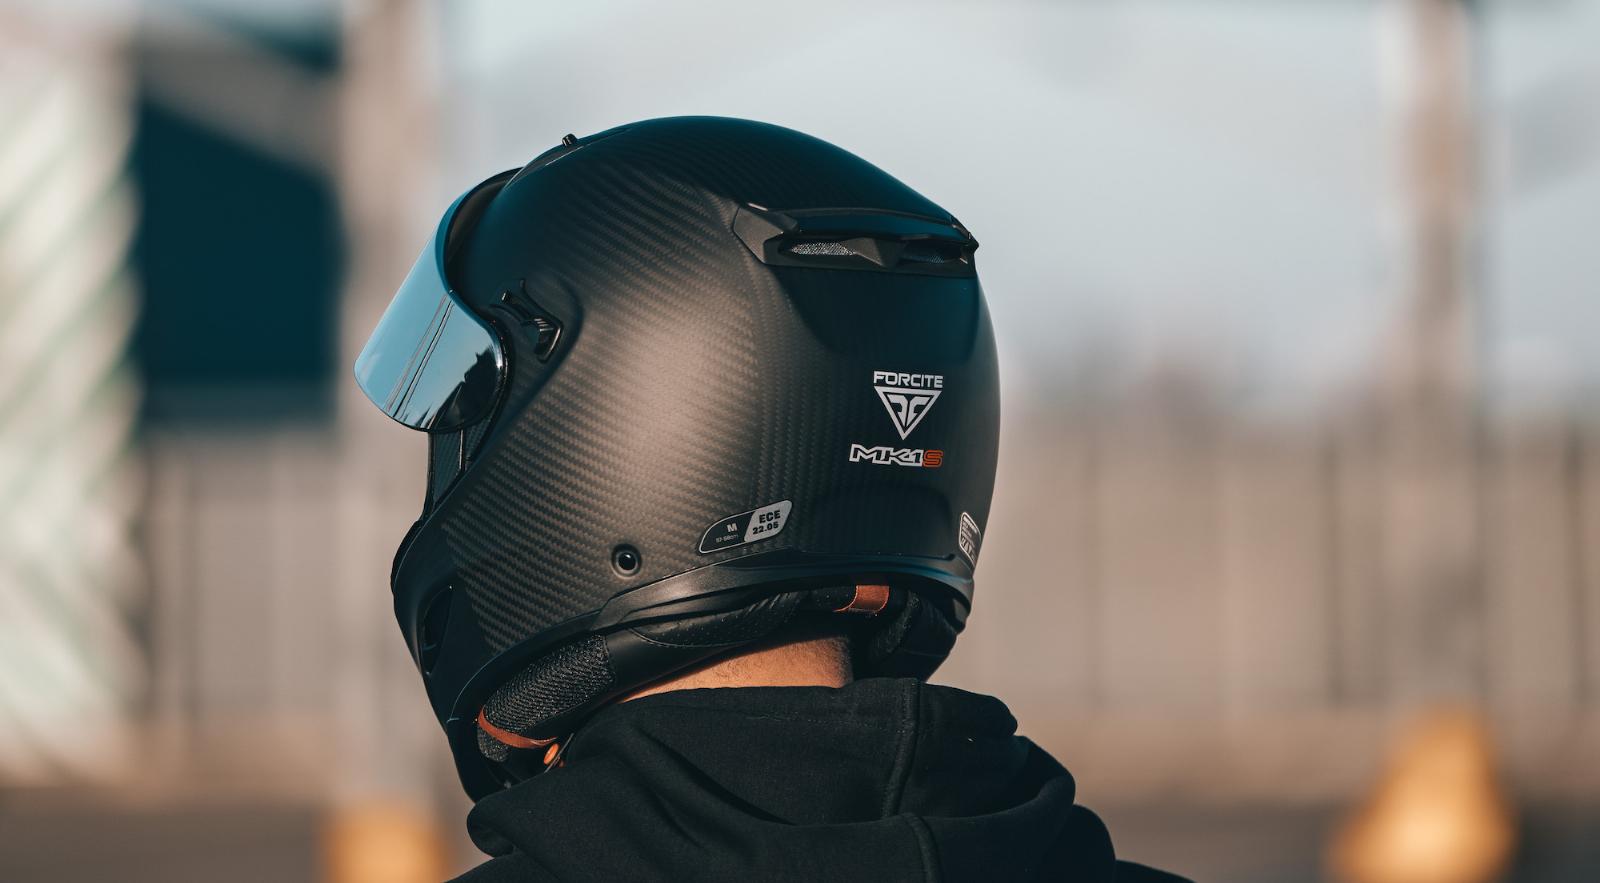 Forcite seeks the smart helmet success that Skully squandered